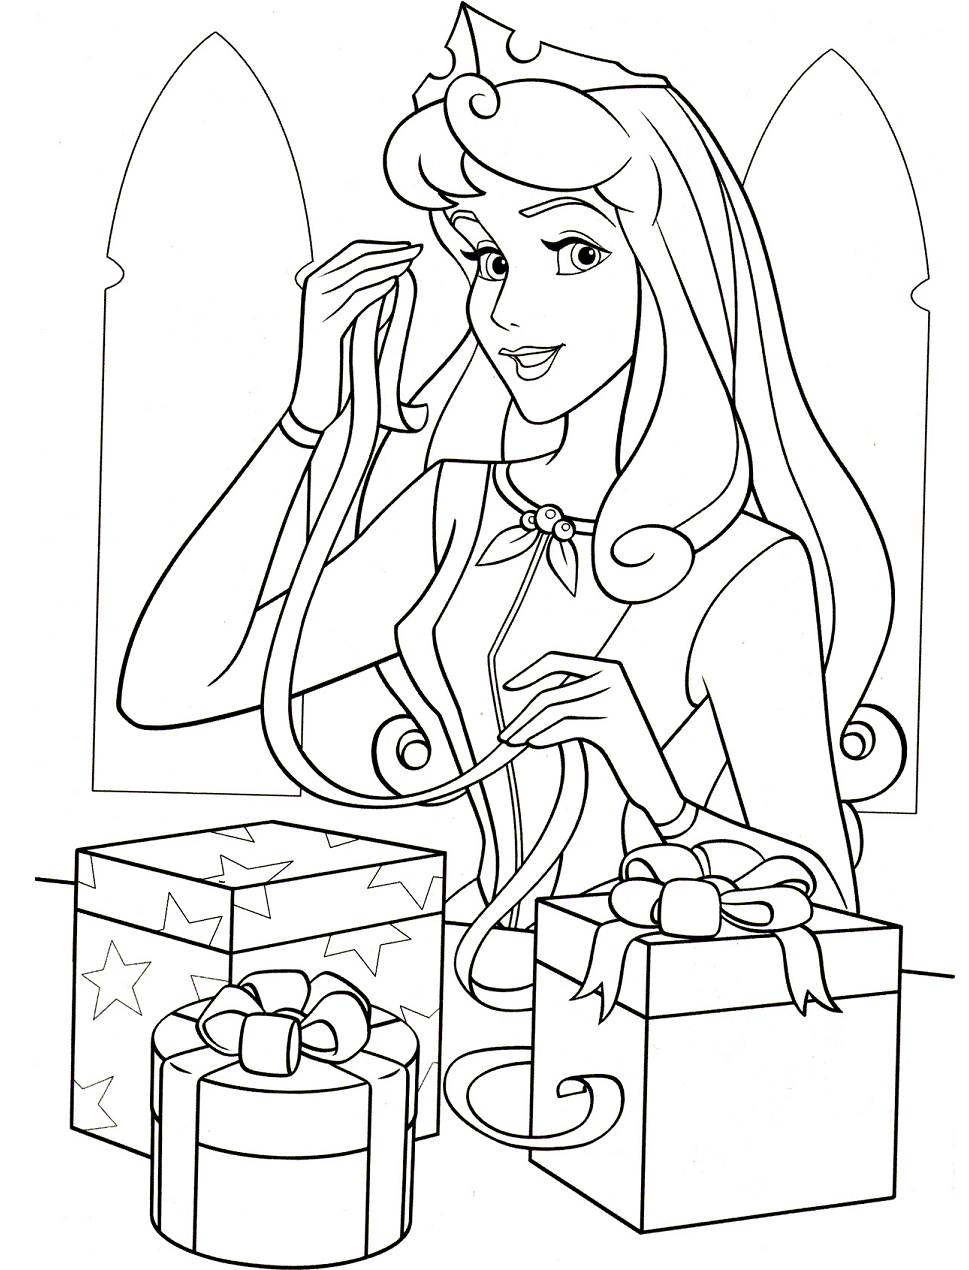 Aurora With Gift Boxes Coloring Page - Free Printable Coloring Pages for  Kids